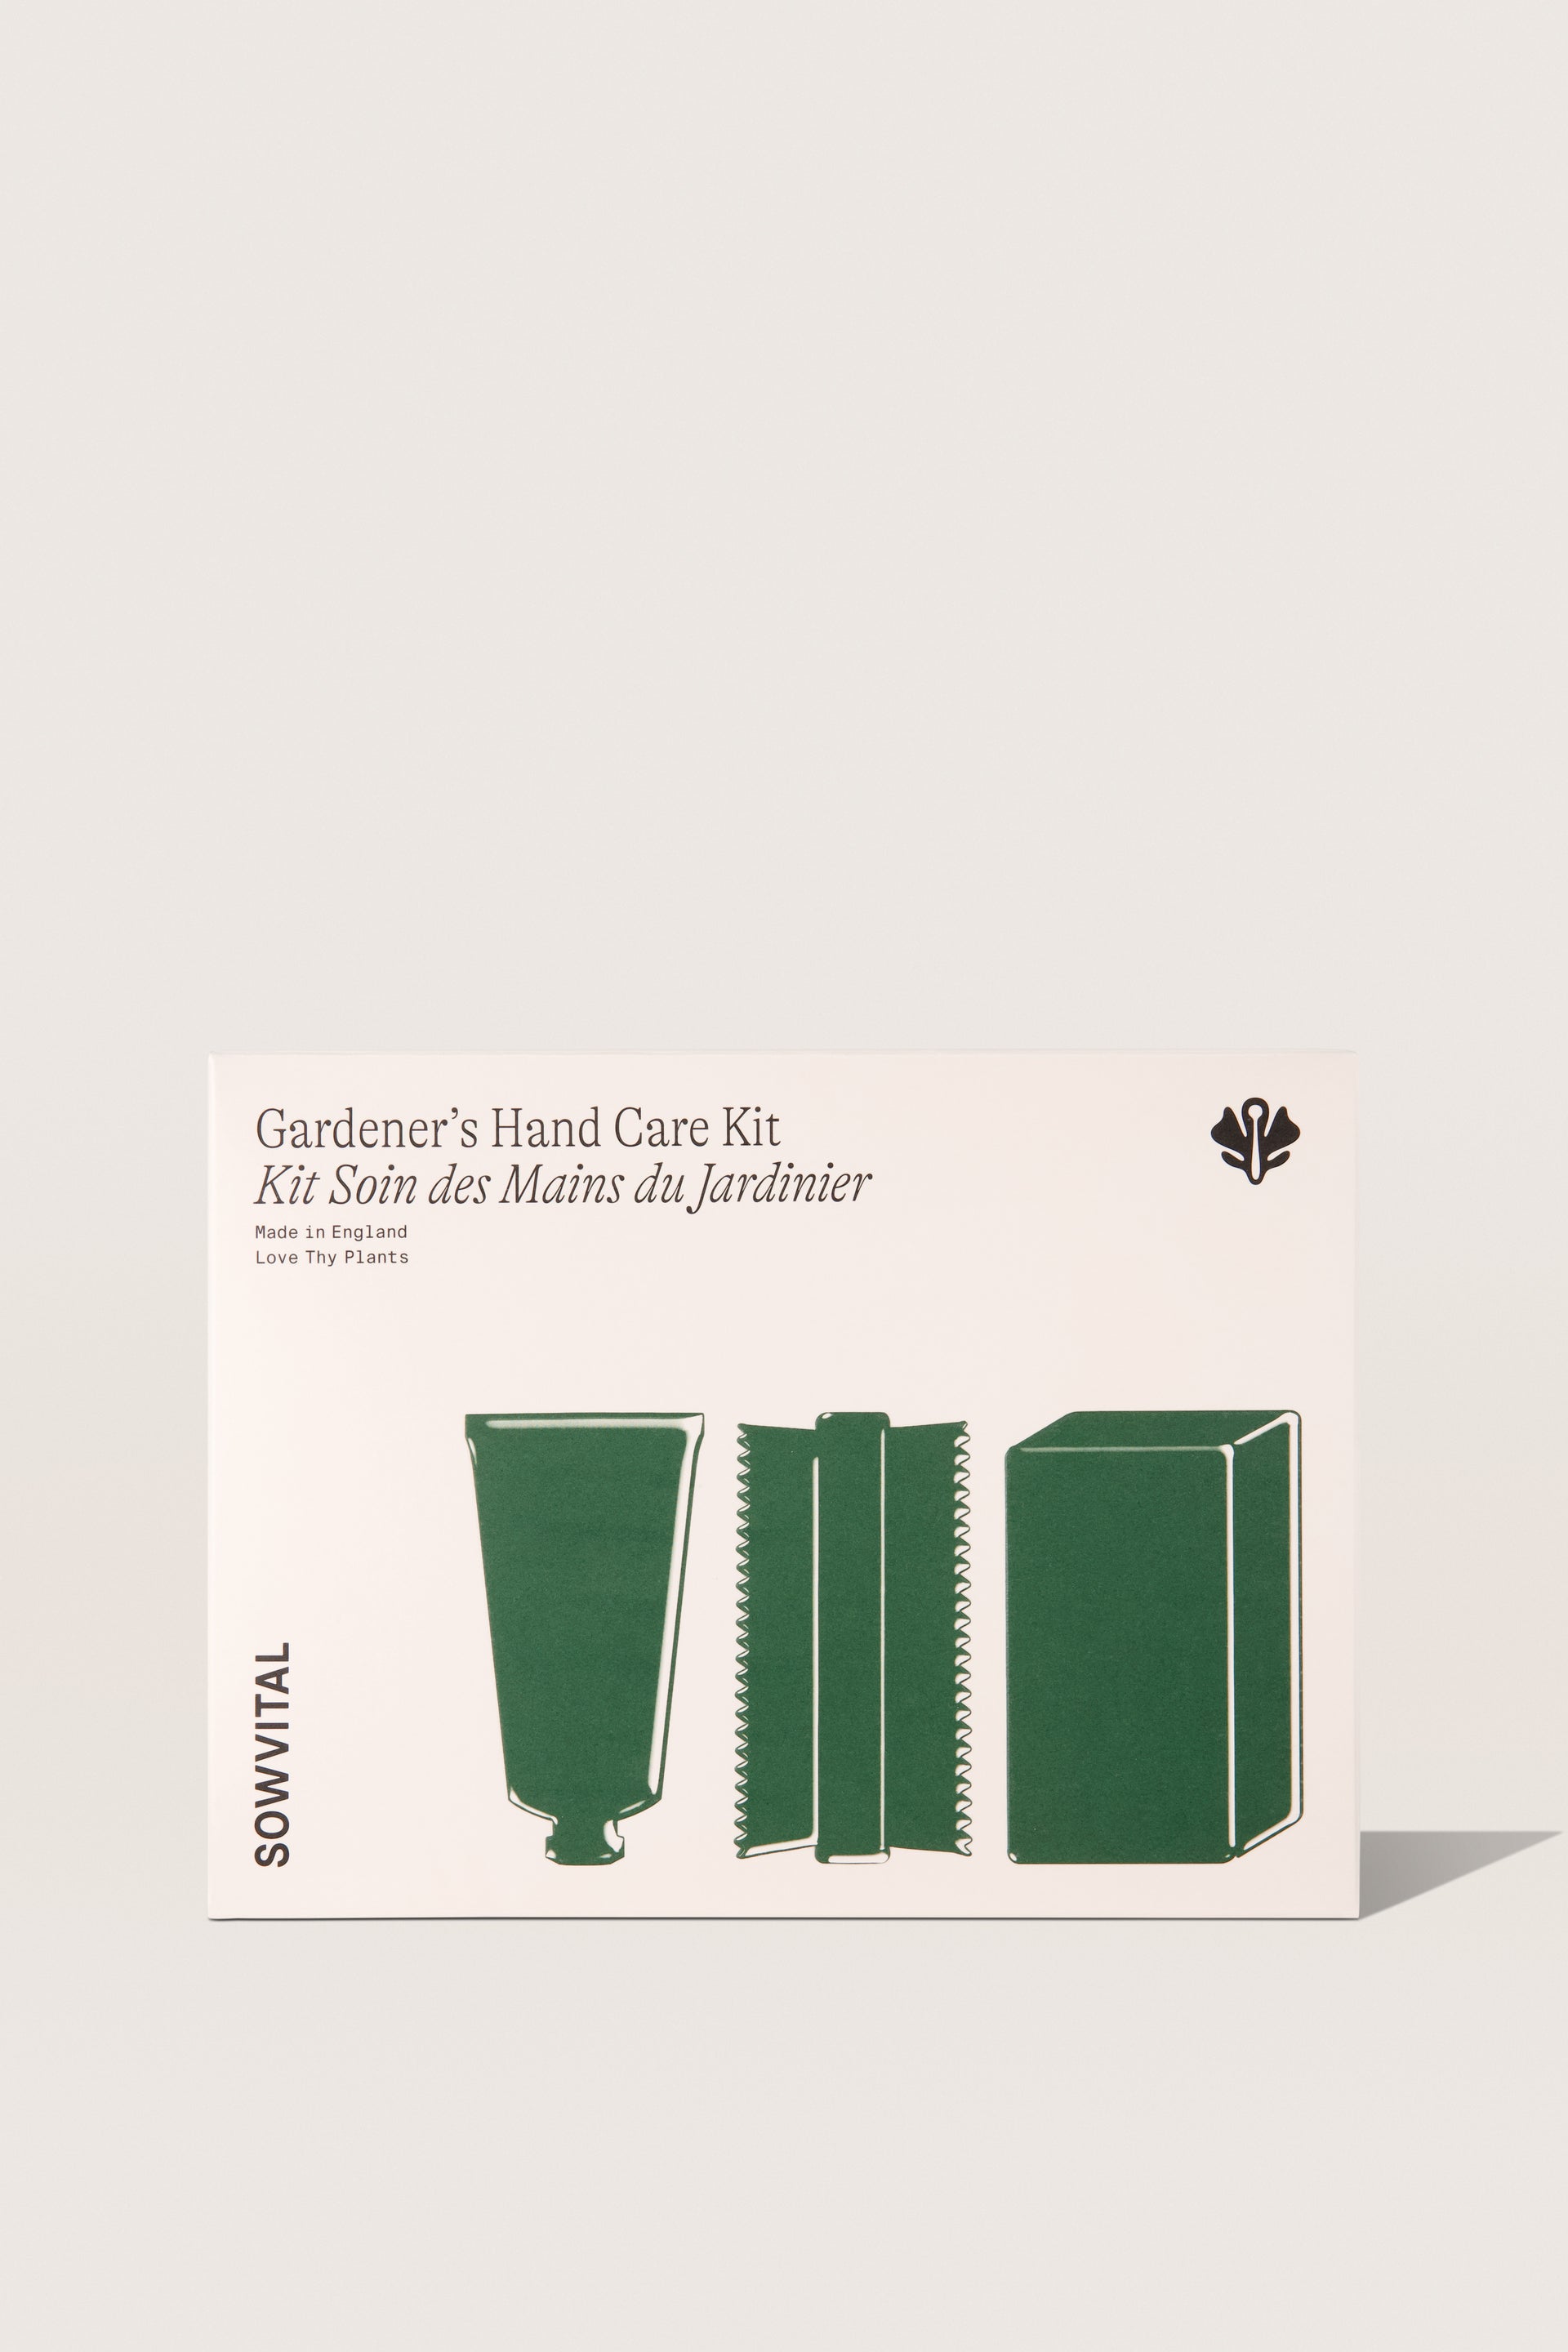 The package of the Gardener's hand care kit.